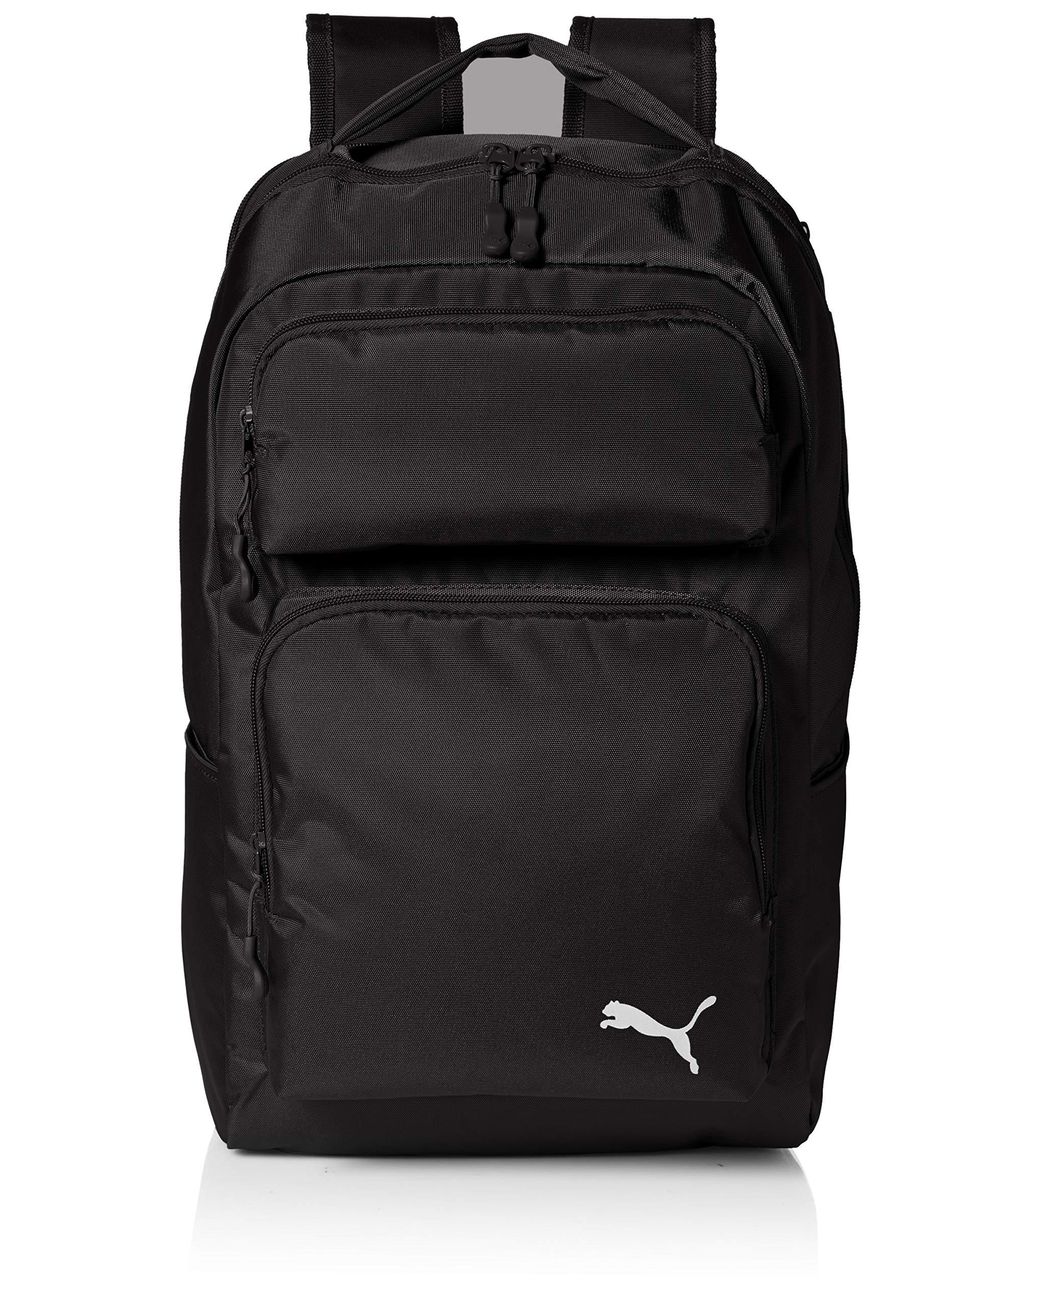 PUMA Aesthetic Backpack in Black for 